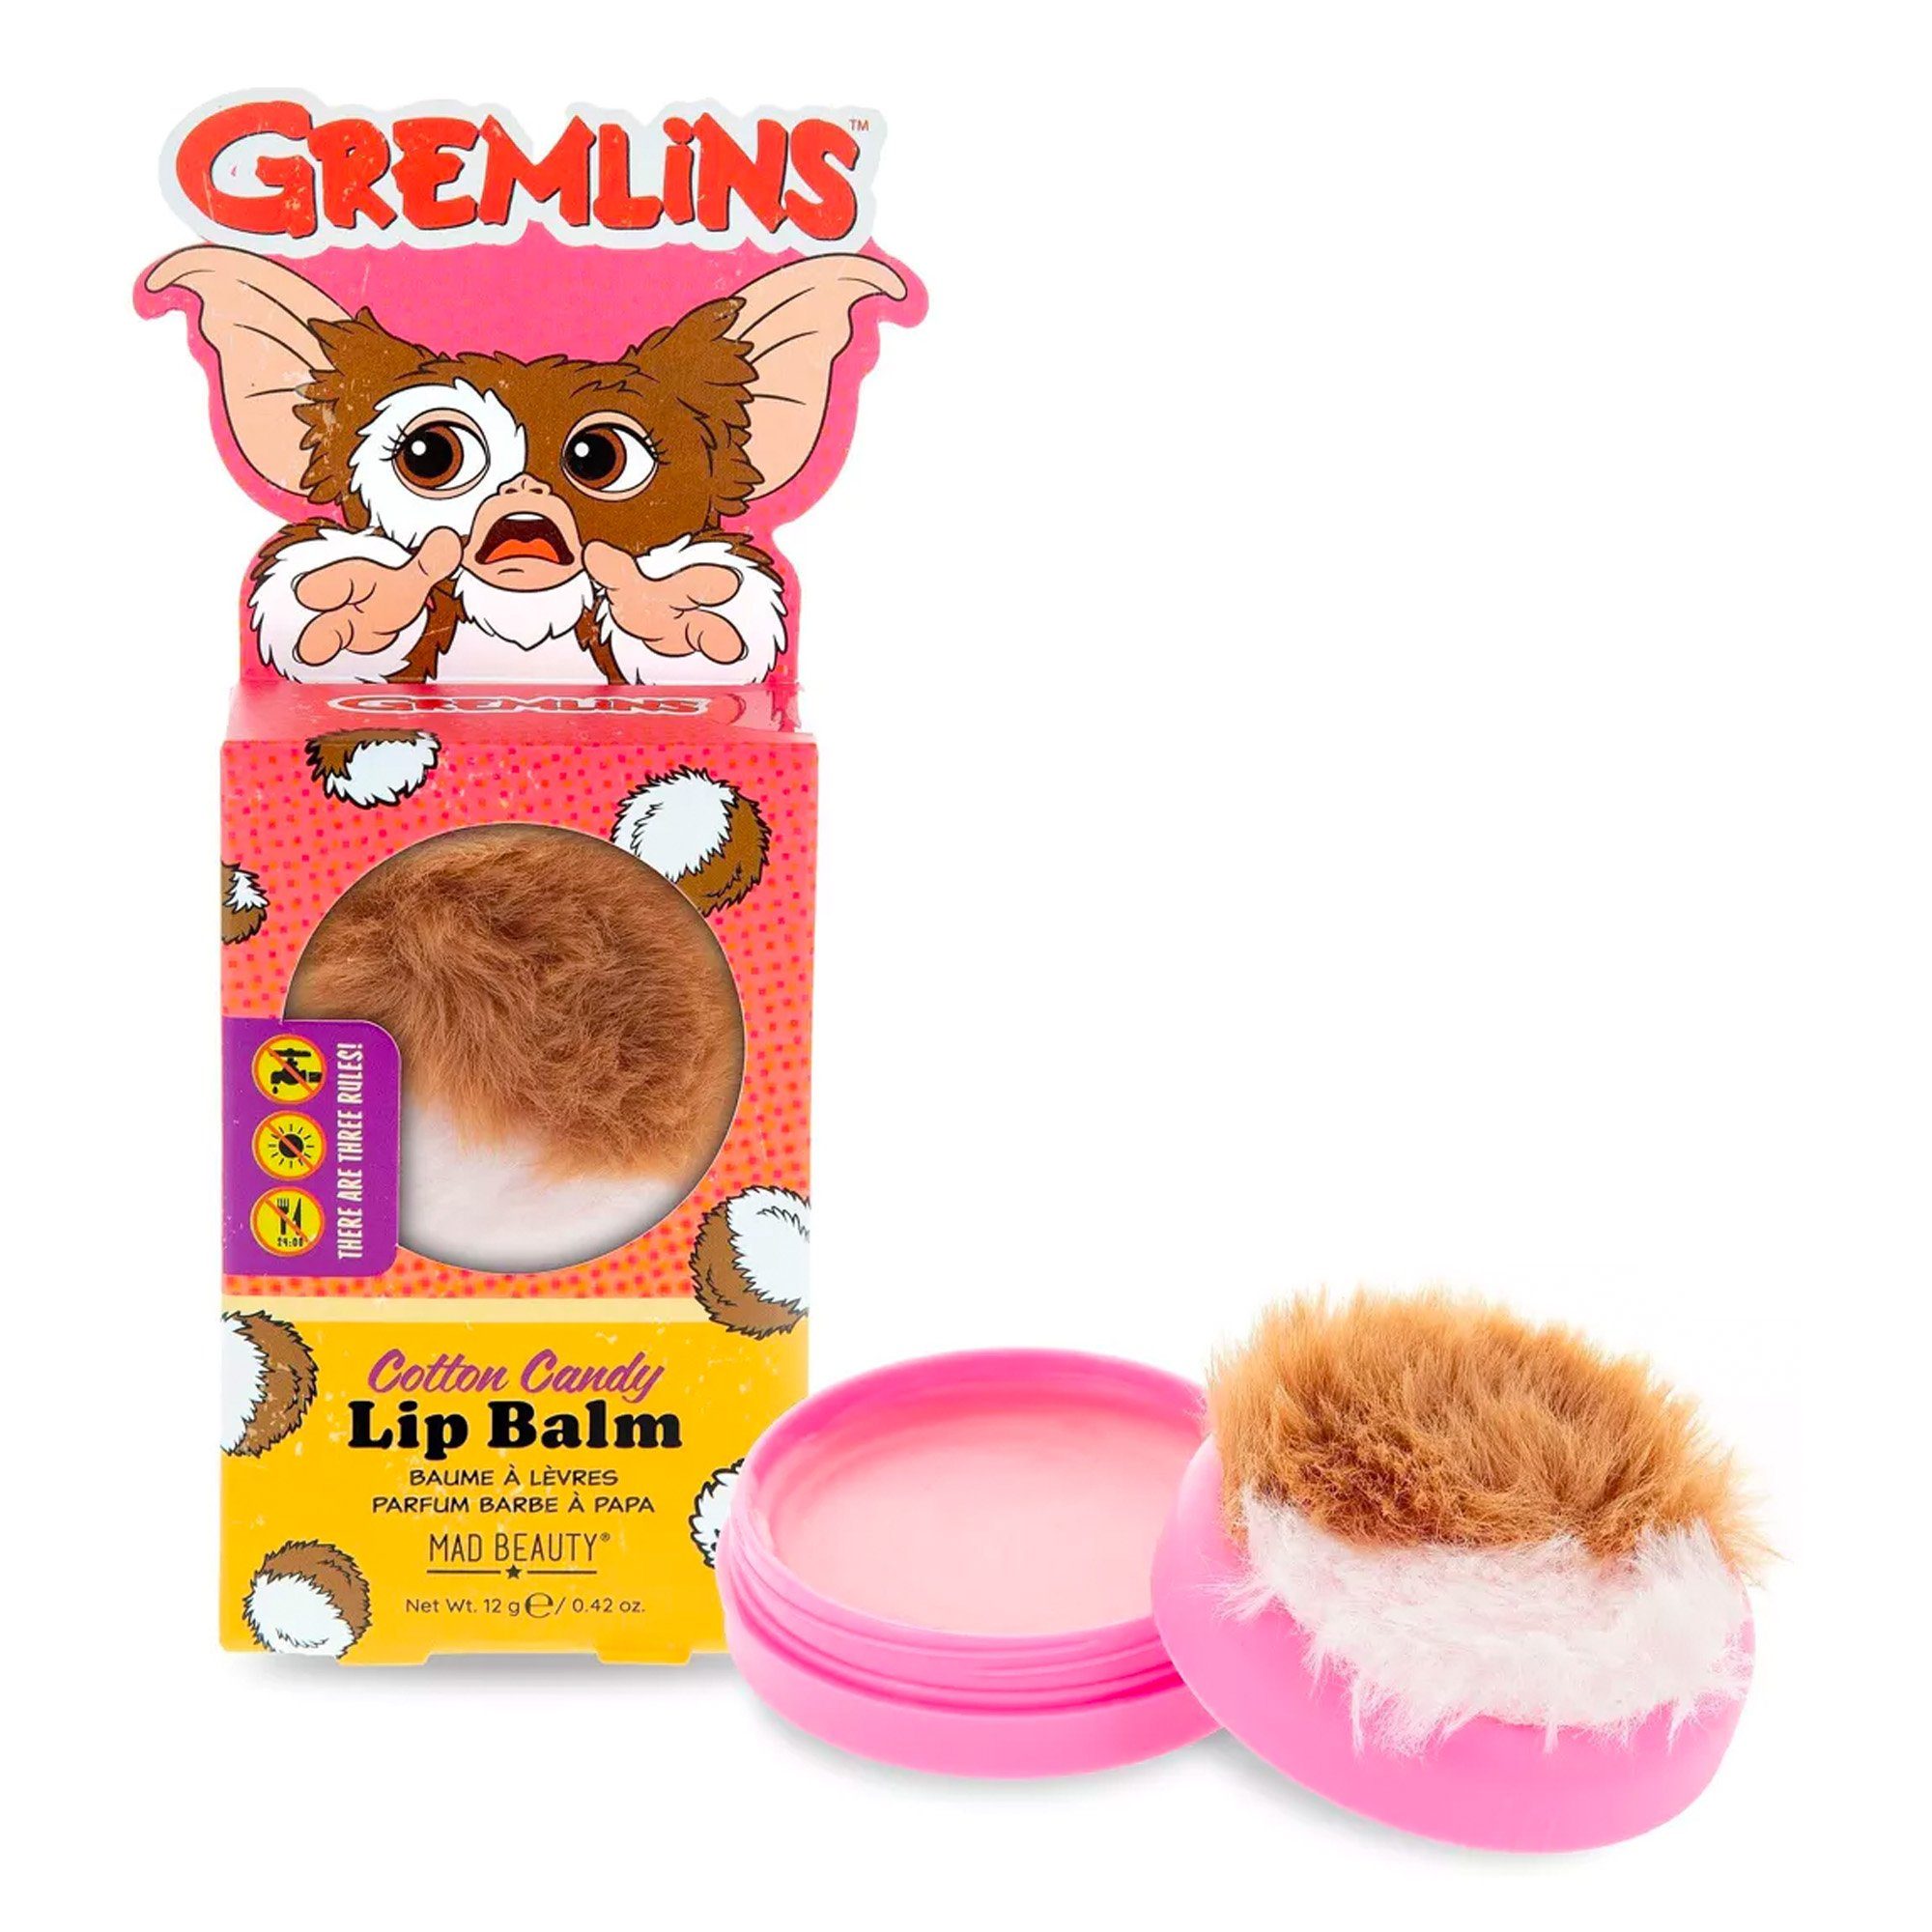 Lippenbalsam Cotton Mad Gremlins Beauty Candy